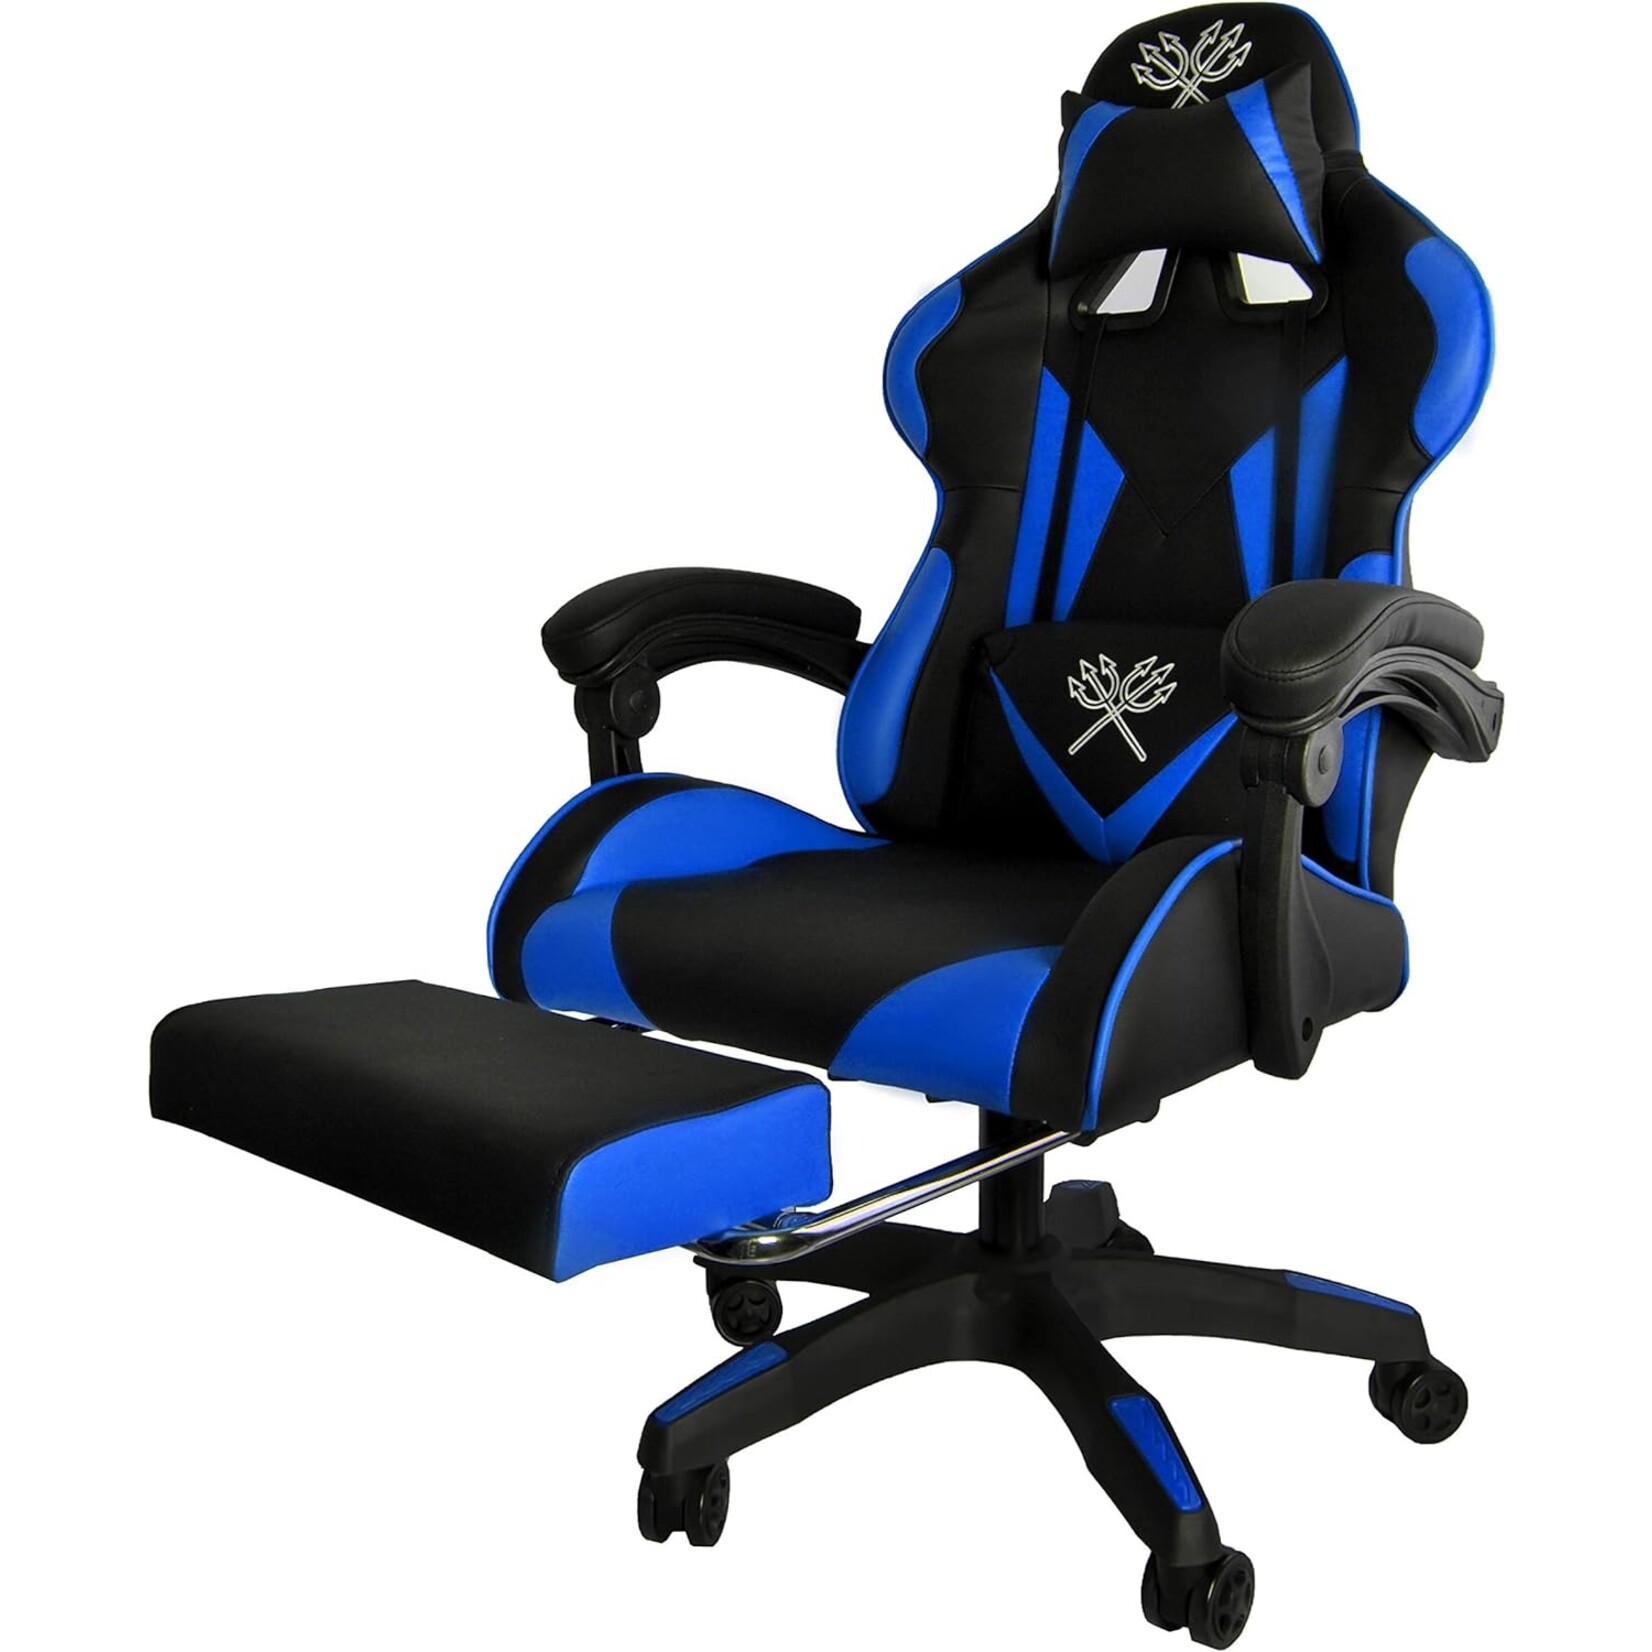 Bobbel Home Bobbel Home - Luxury Office Chair - Adjustable - Extendable Footrest - Gaming Chair - Blue